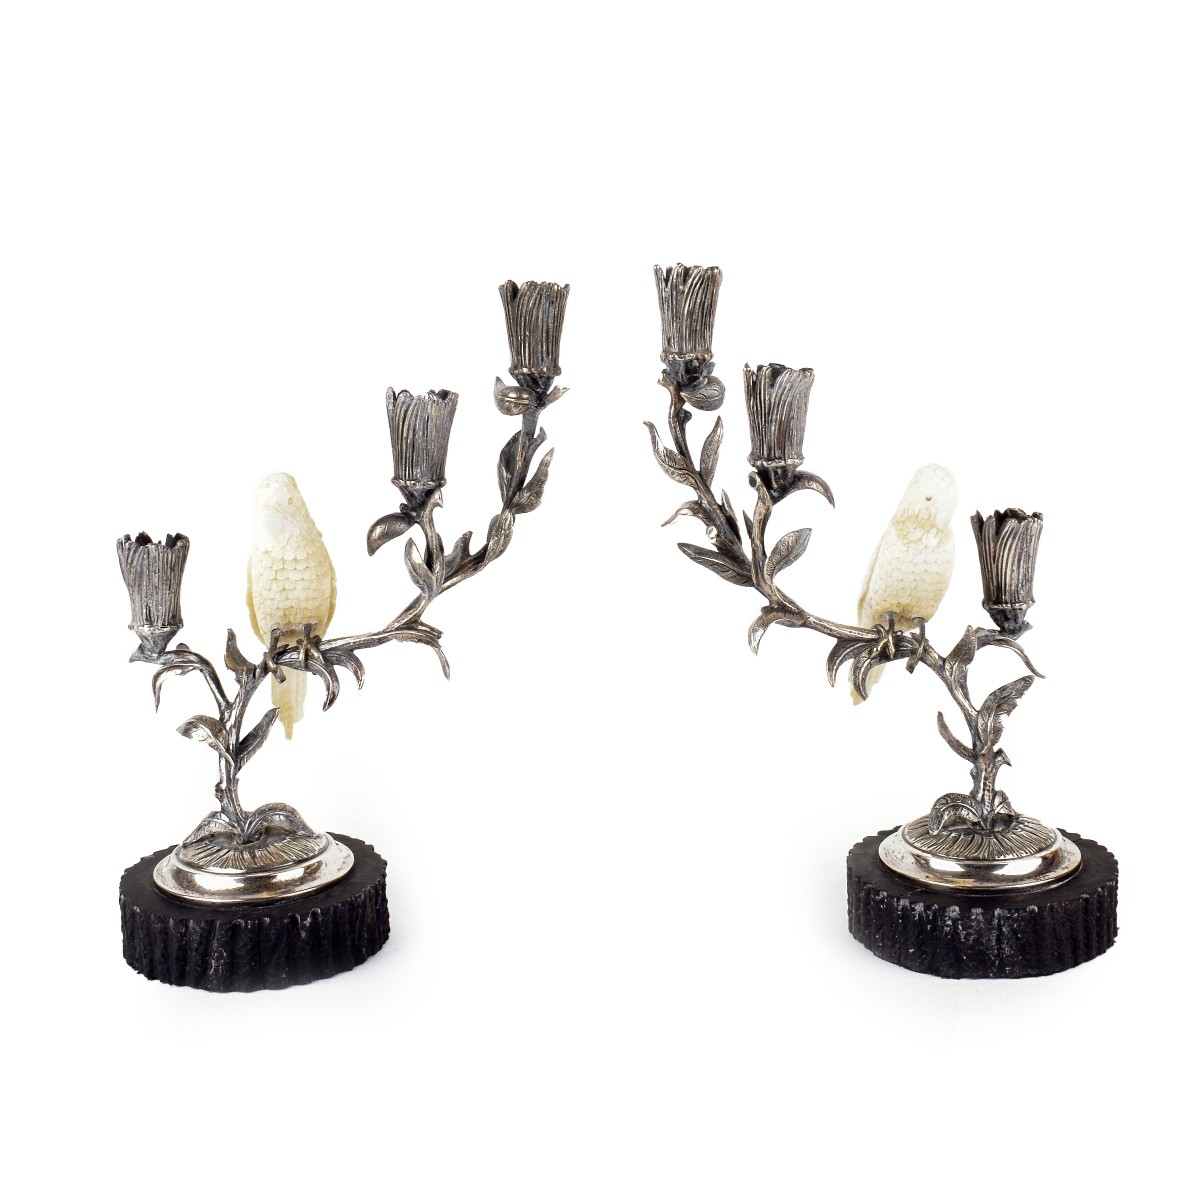 Pair of .915 Silver Candlesticks